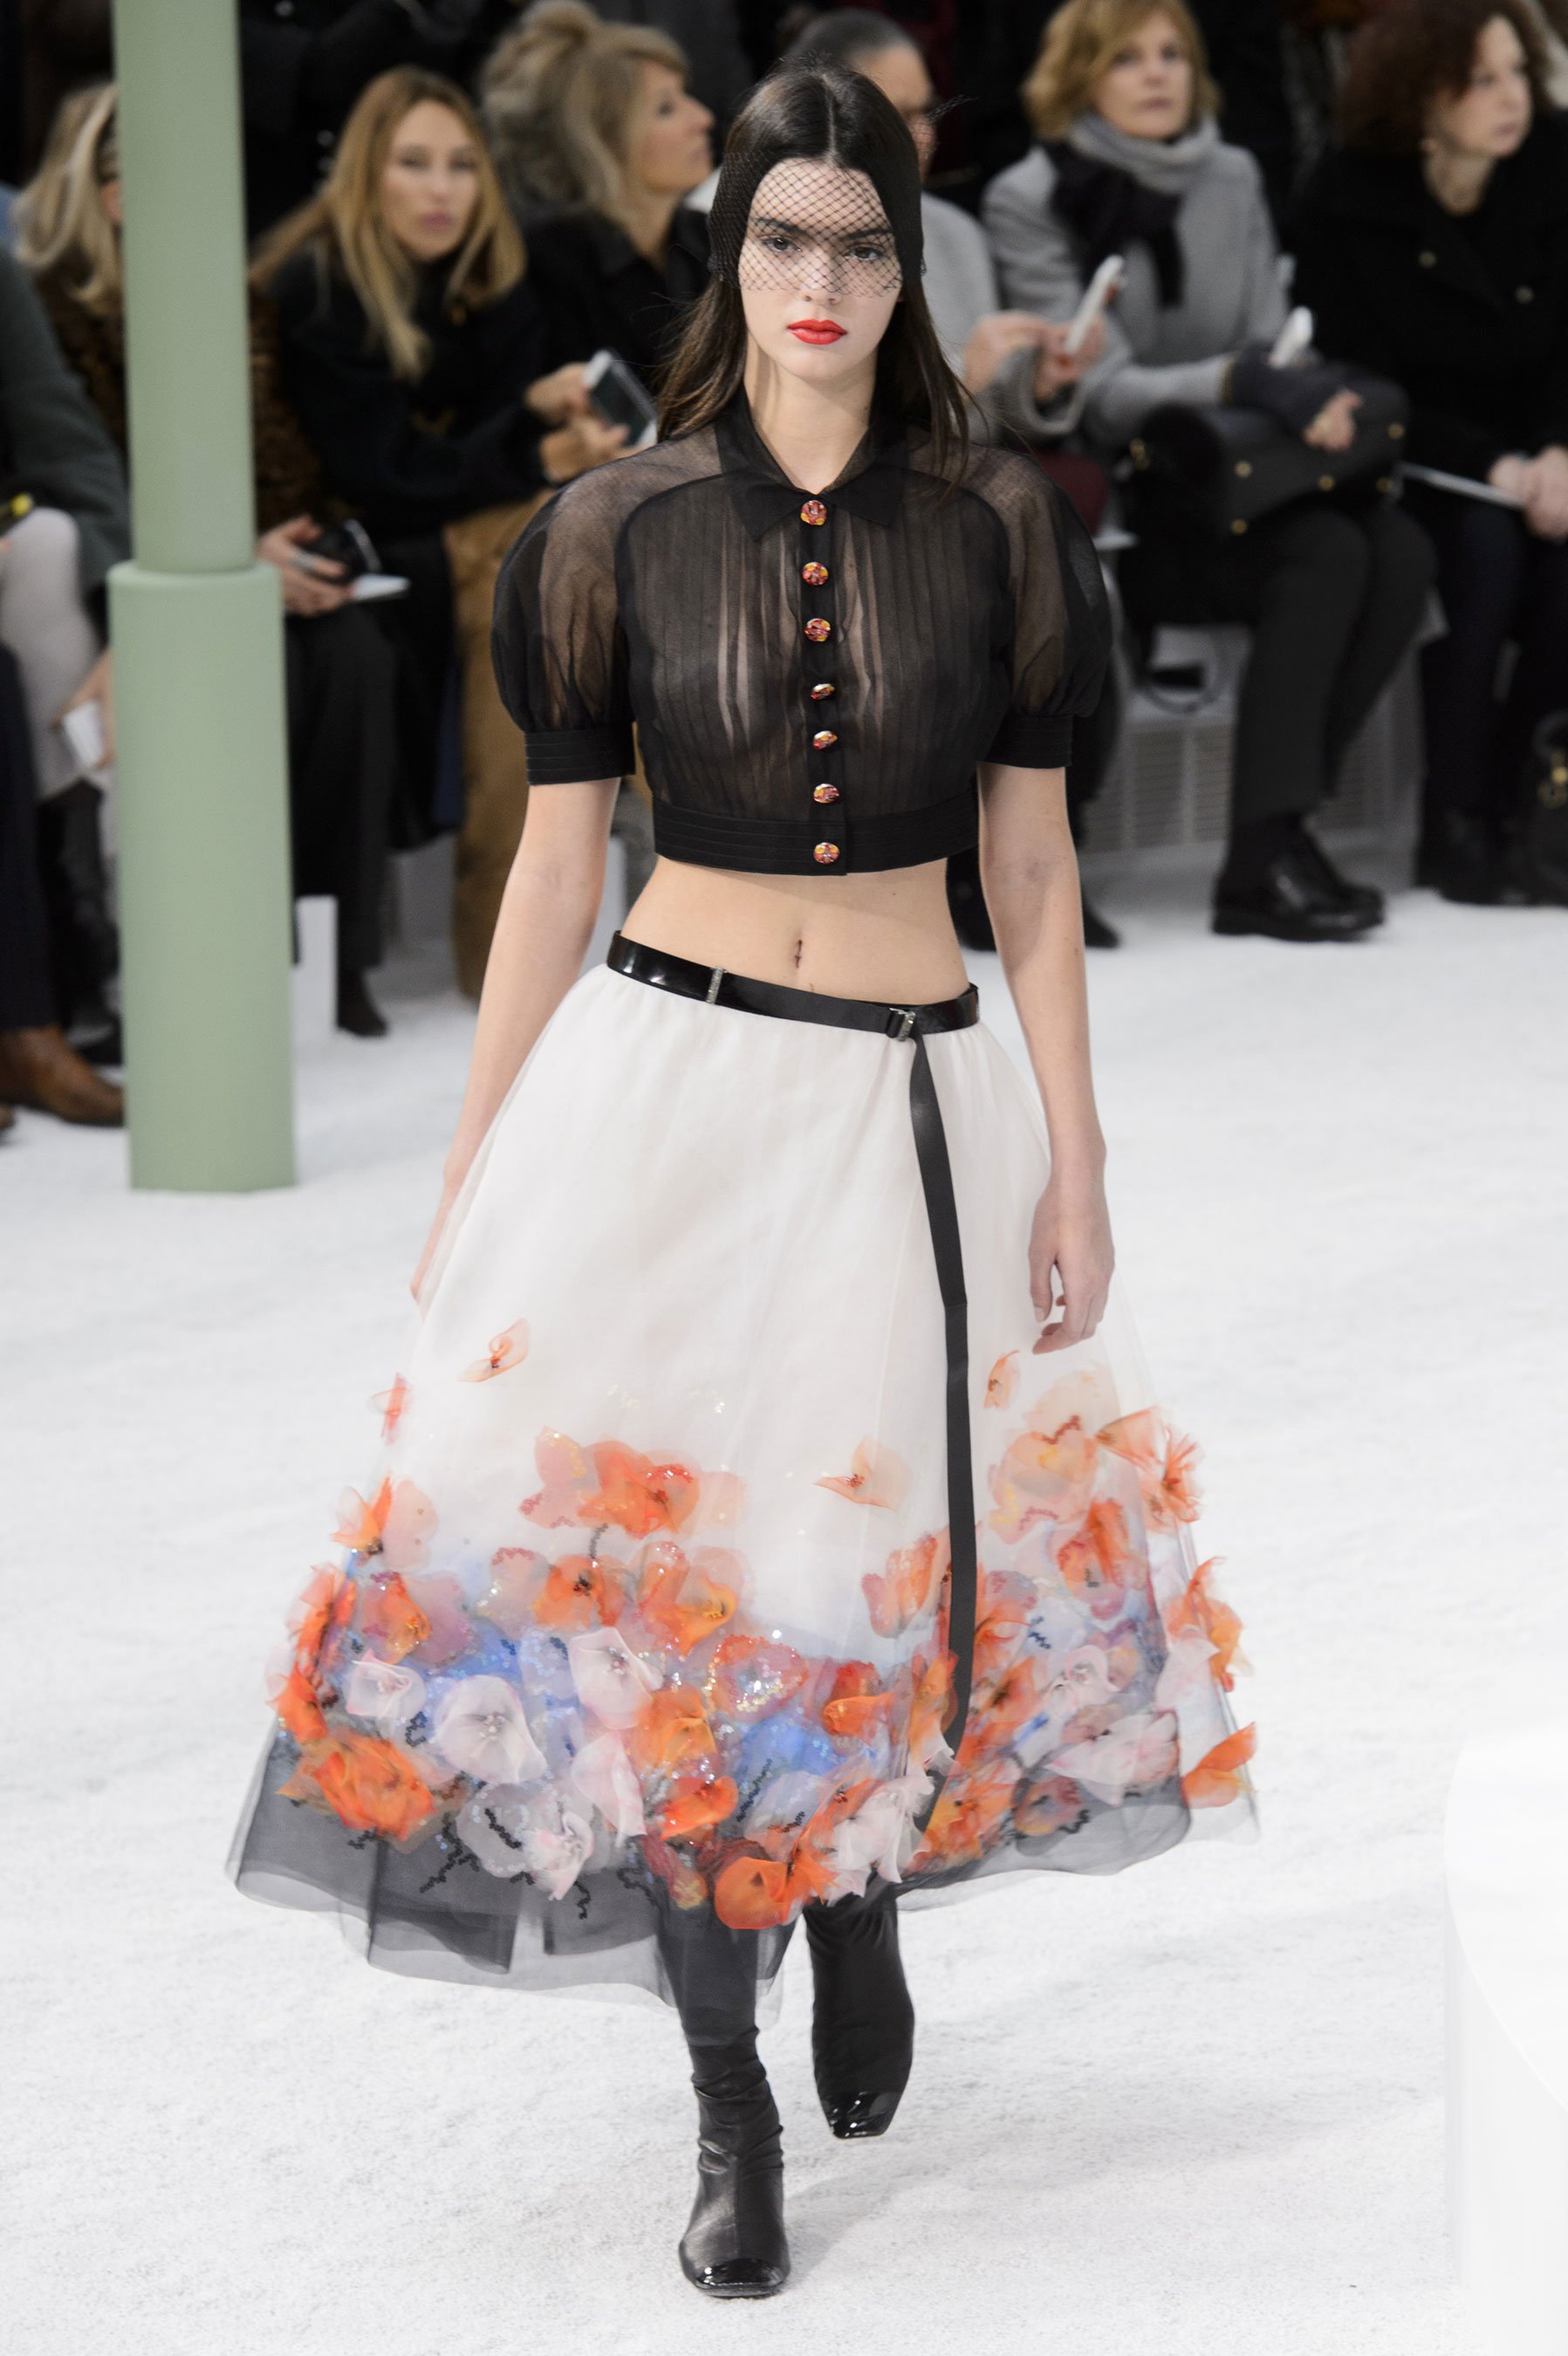 chanel haute couture spring 2015 pfw 47 kendall